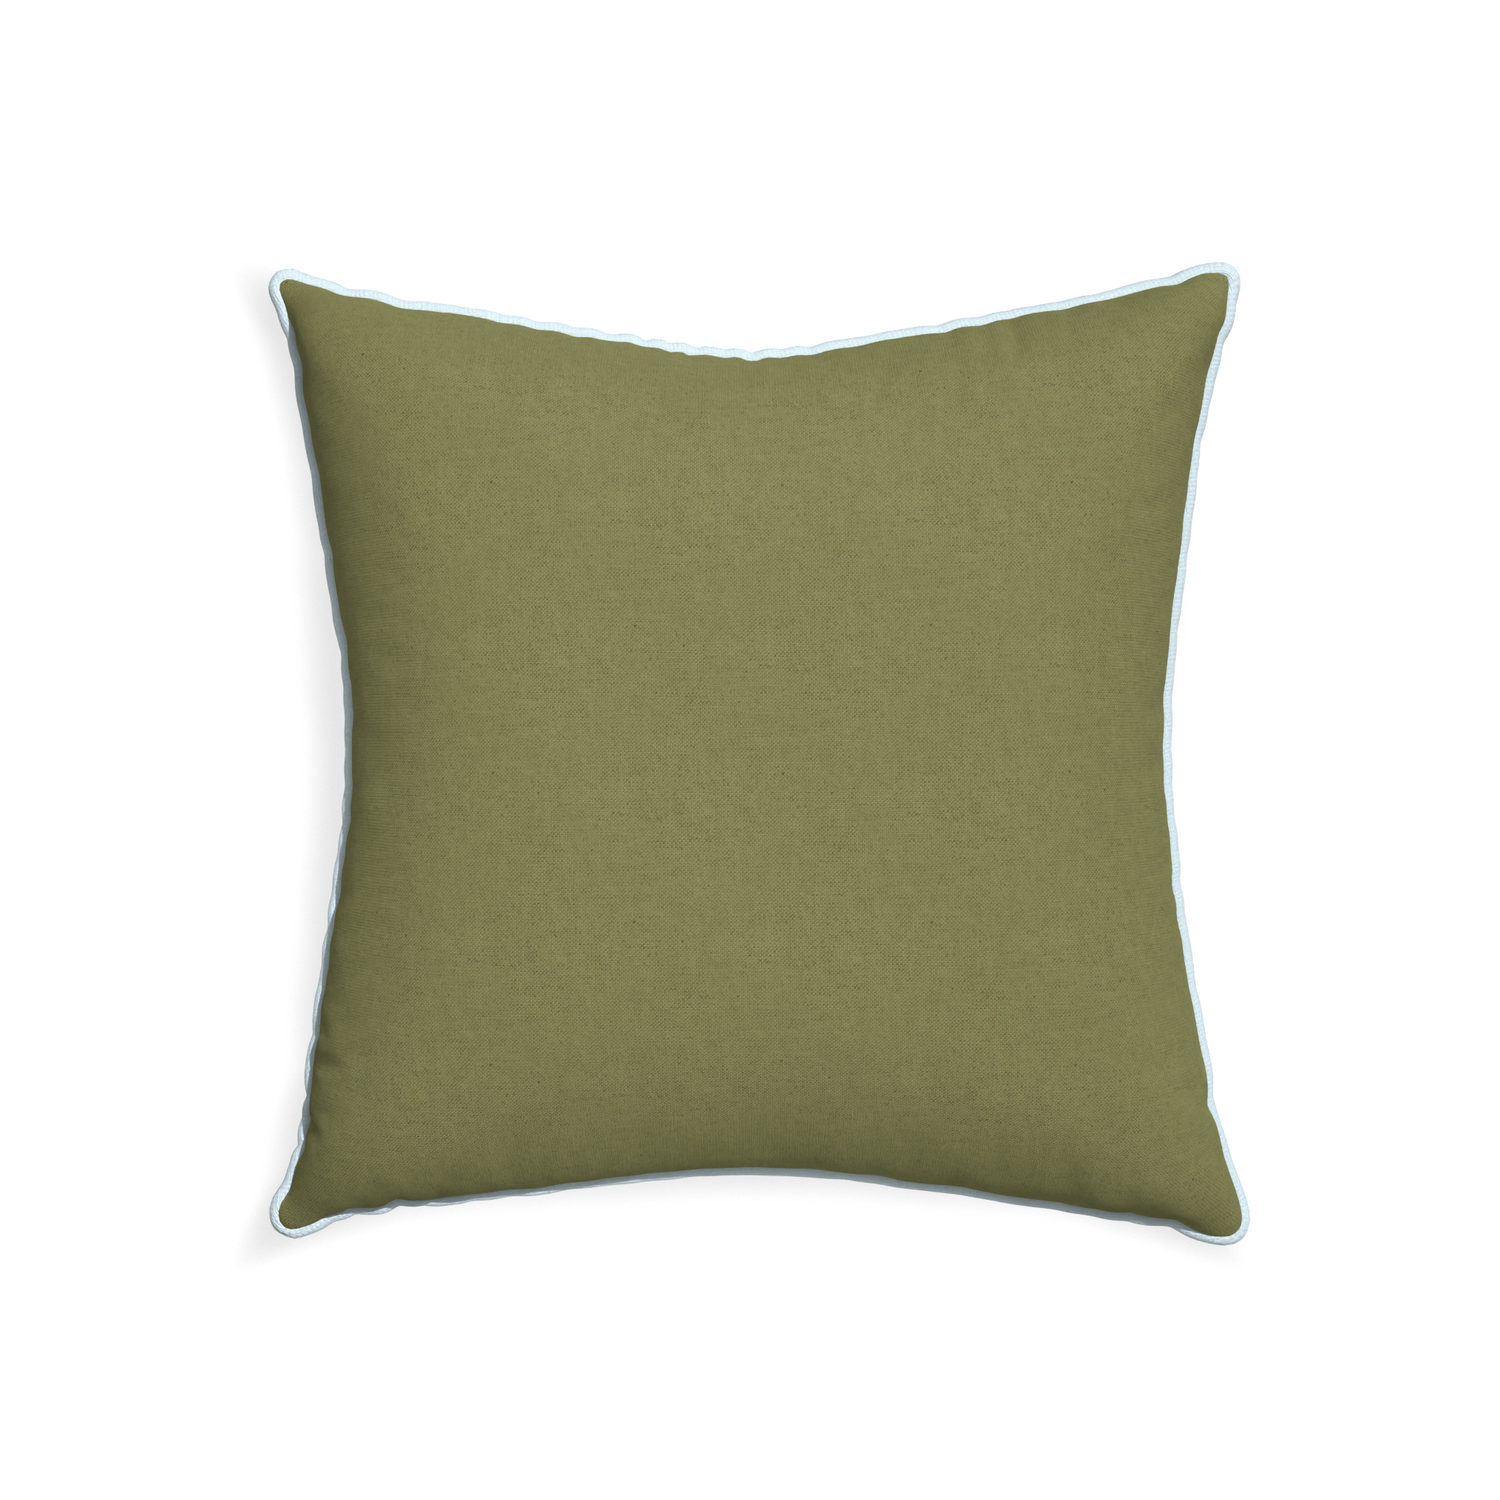 22-square moss custom moss greenpillow with powder piping on white background